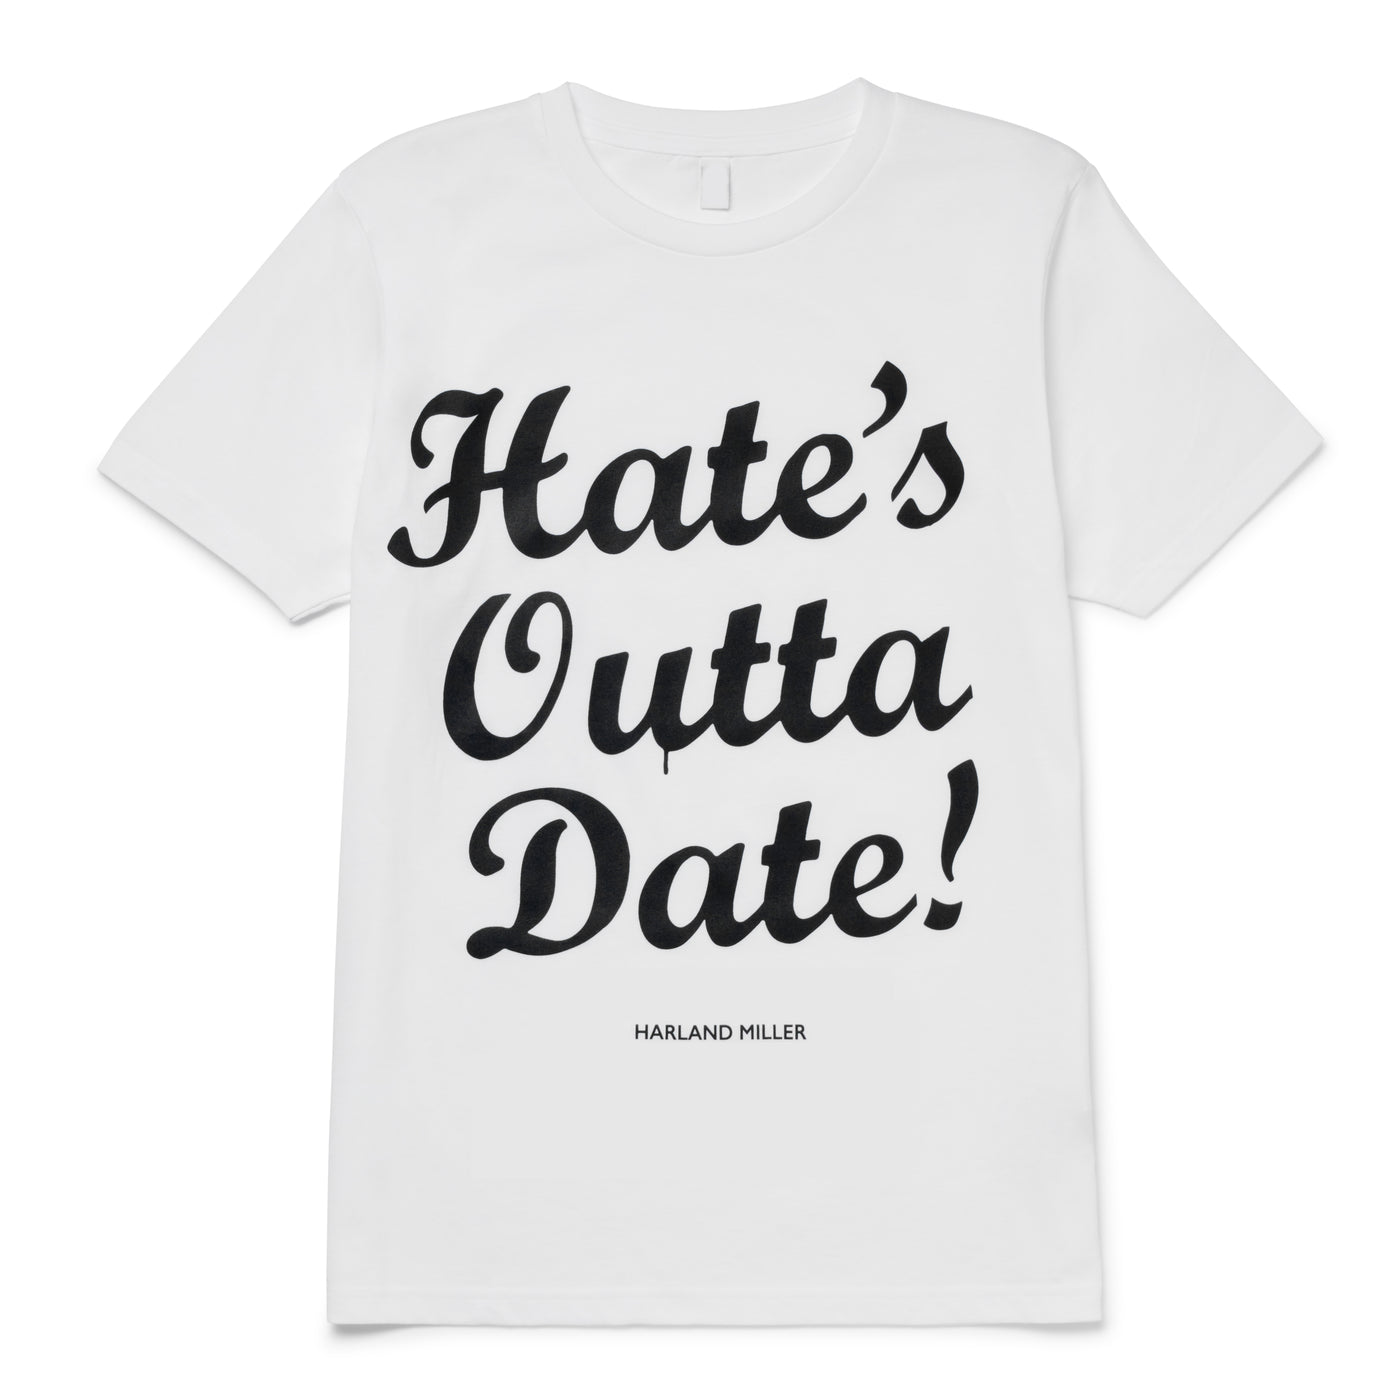 Harland Miller "Hate's Outta Date" T Shirt